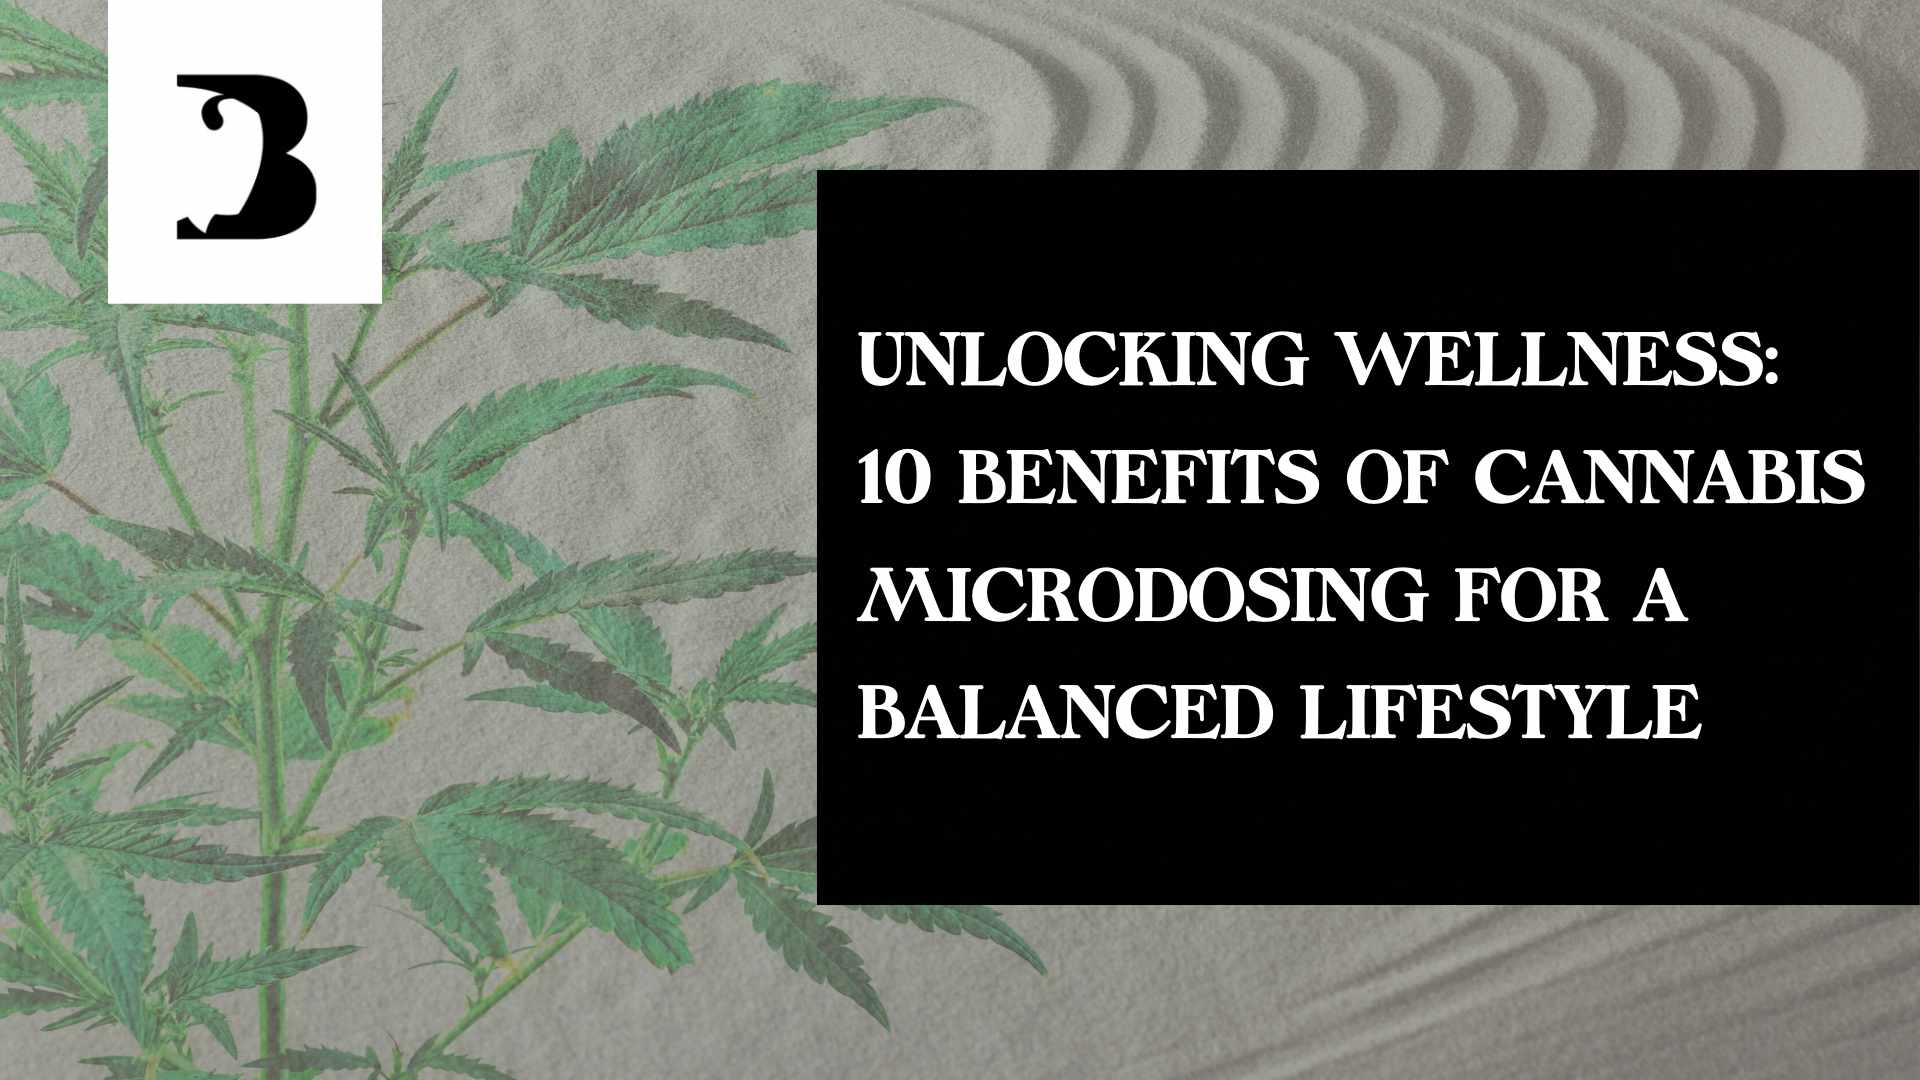 Benefits of Cannabis Microdosing for a Balanced Lifestyle